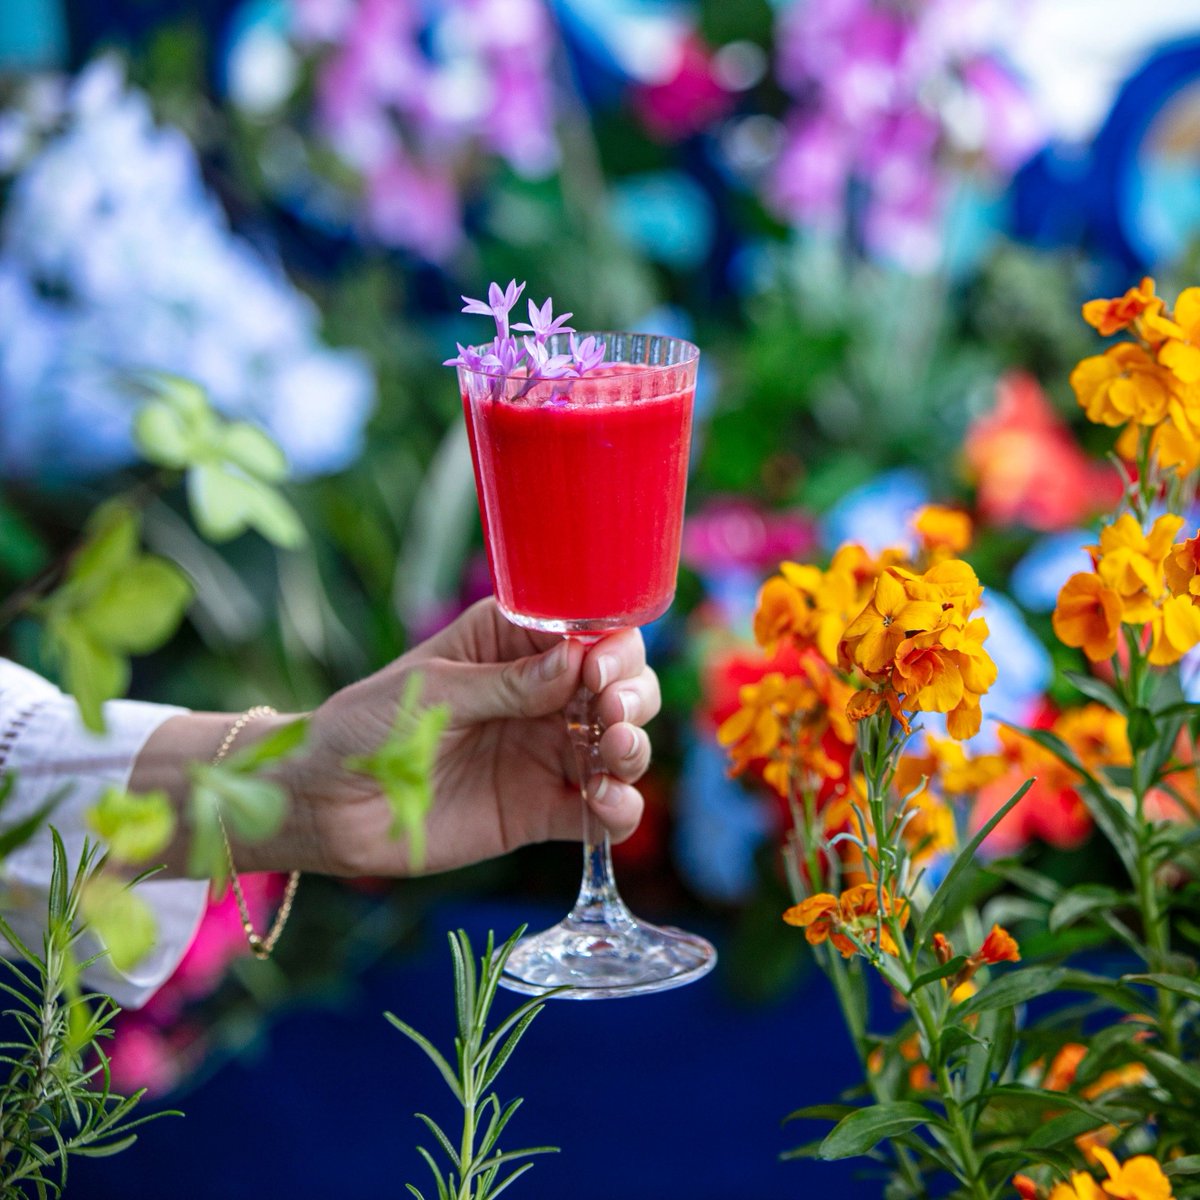 Today is the day... the official launch of our summer terrace, in partnership with @whitleyneillgin. This year we're highlighting the best of British summertime. Think music festivals, BBQs with friends, lawn games and making the most of long evenings with alfresco dining!